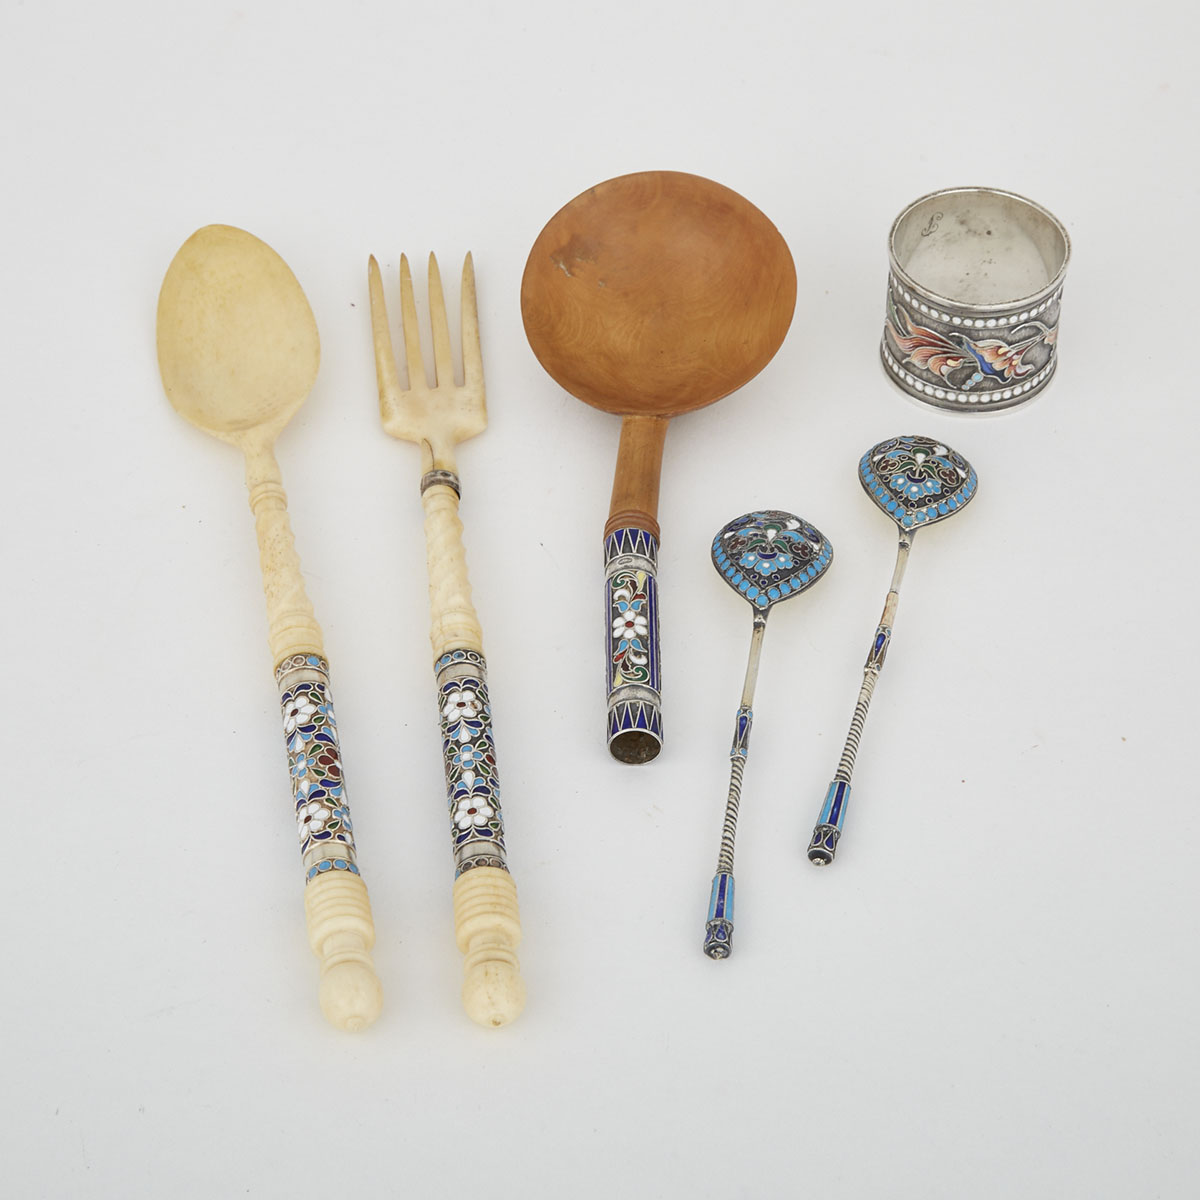 Five Pieces of Russian Cloisonné Enameled Silver Flatware and a Napkin Ring, early 20th century